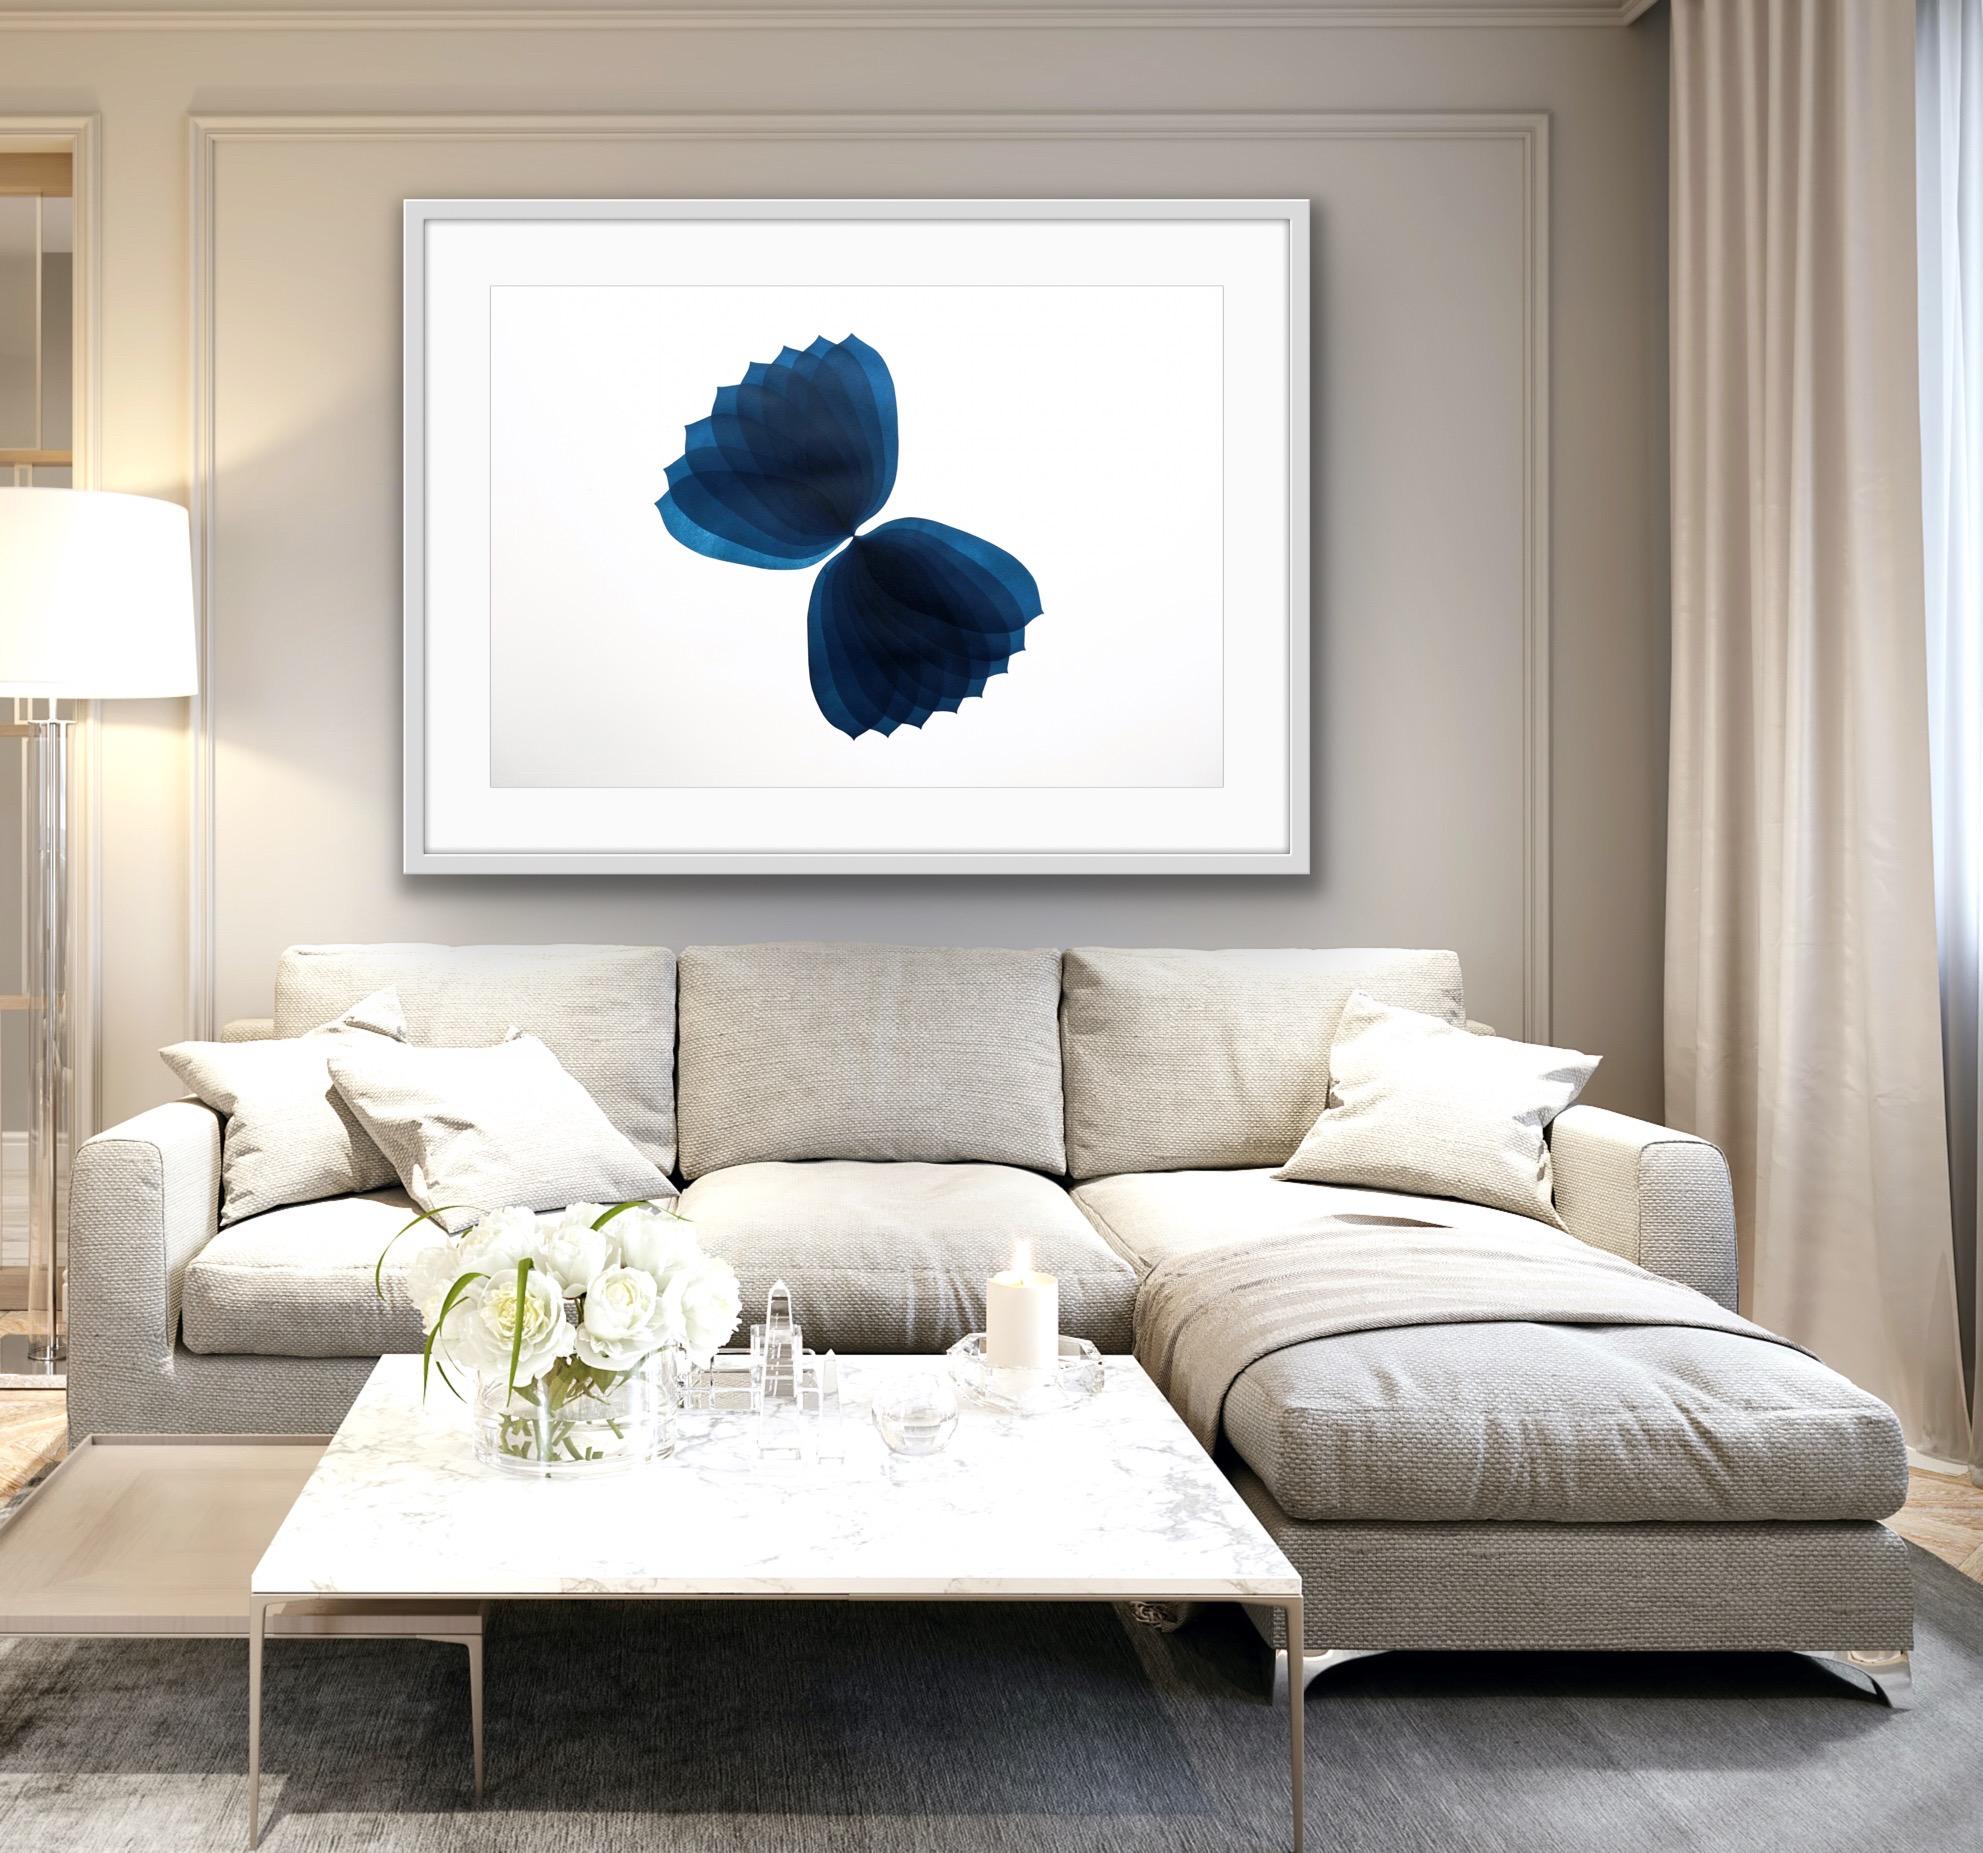 NV23, Original Blue Abstract Art, Contemporary Blue and White Minimalist Artwork - Print by Jonathan Moss